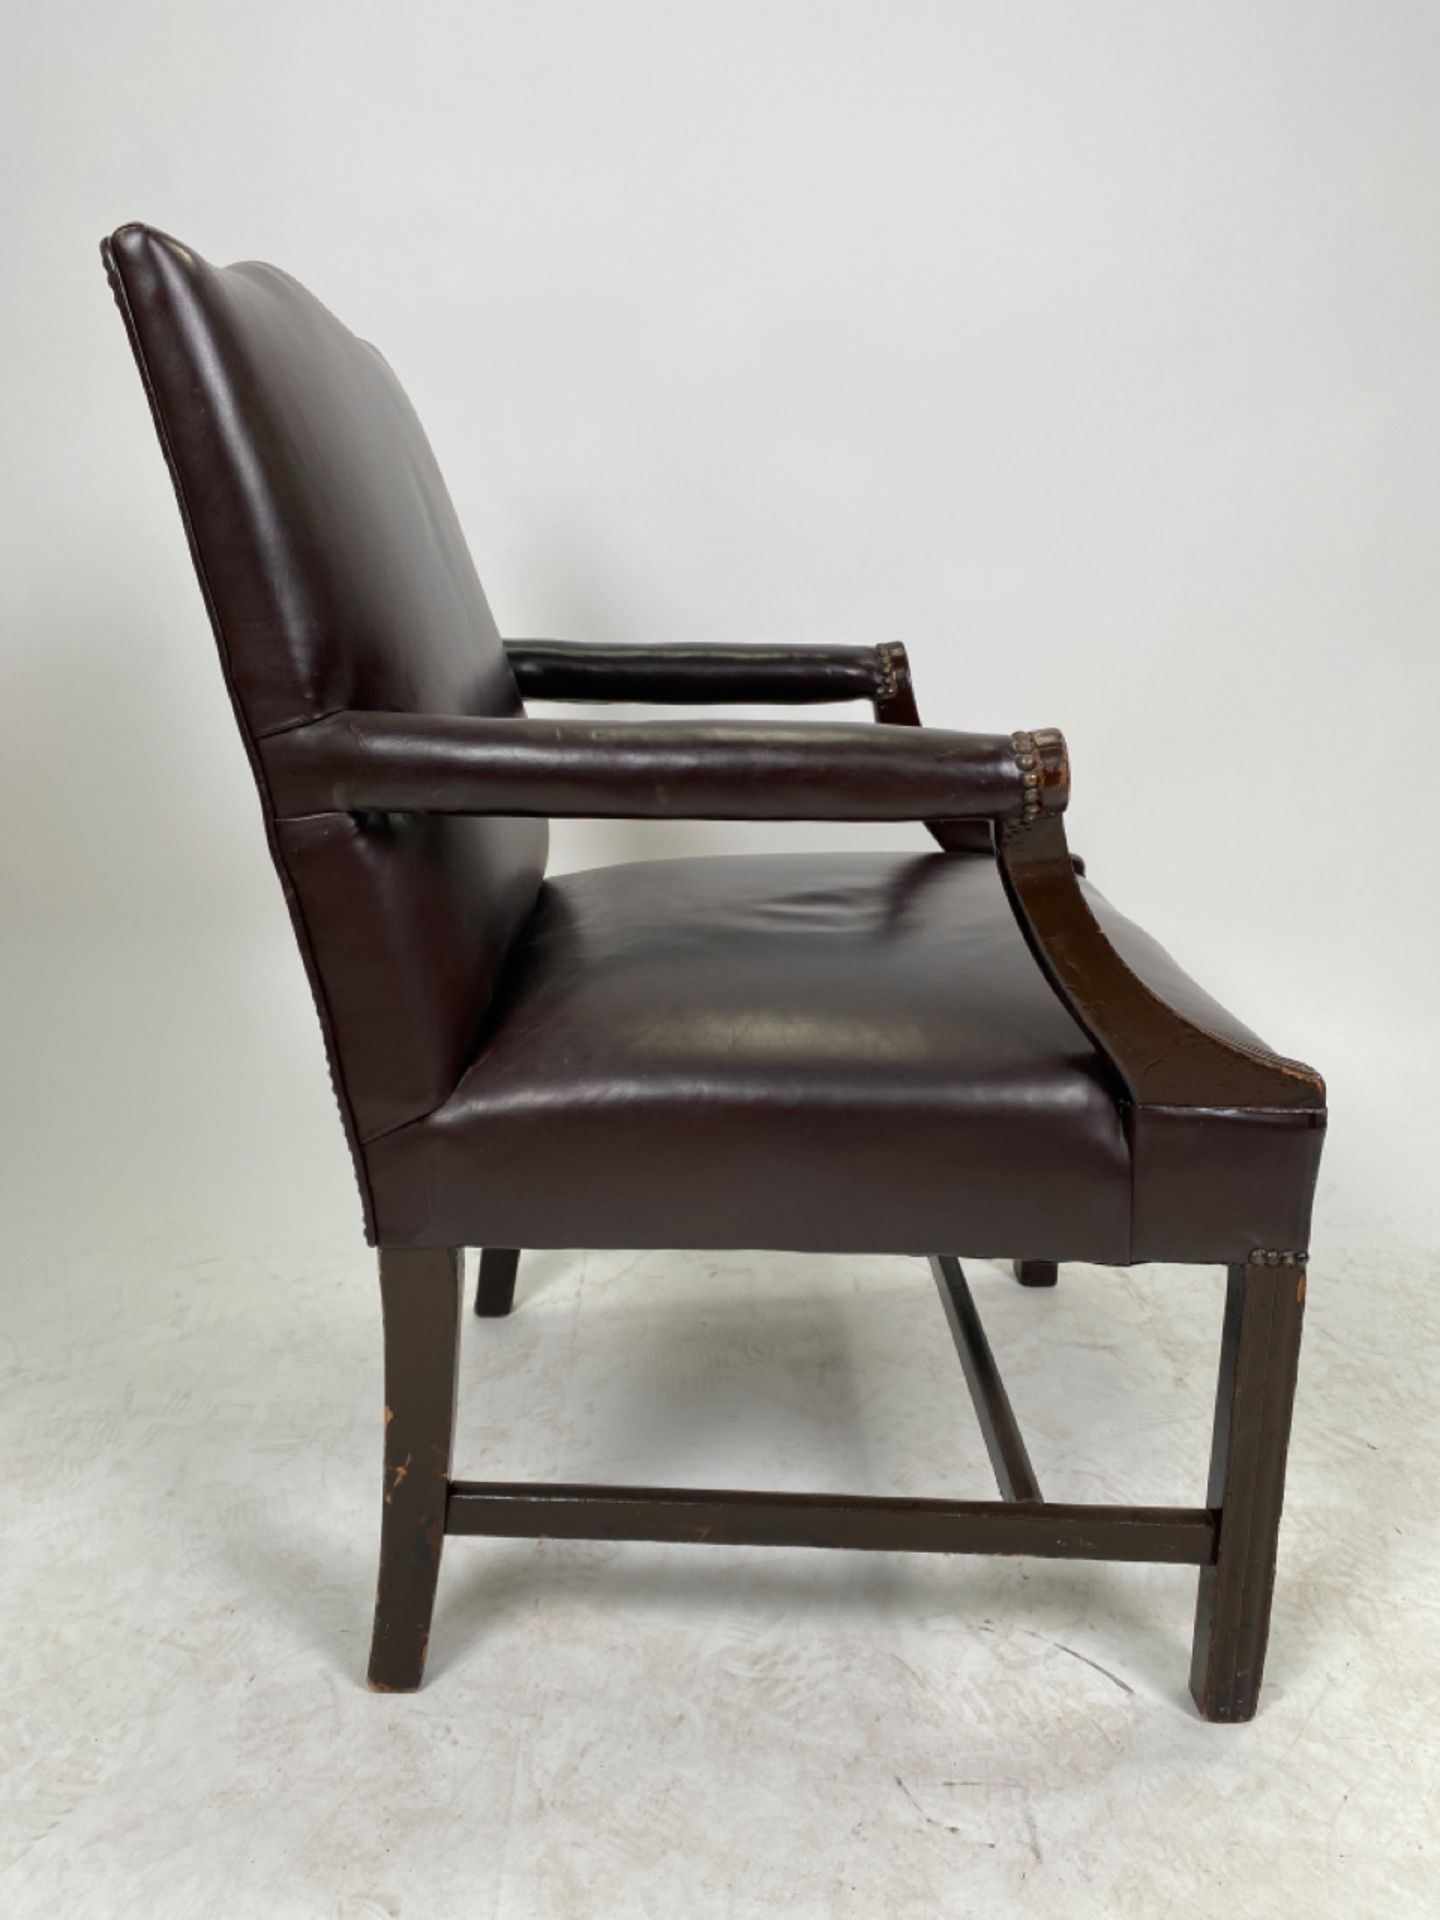 Leather Study Chair - Image 2 of 4